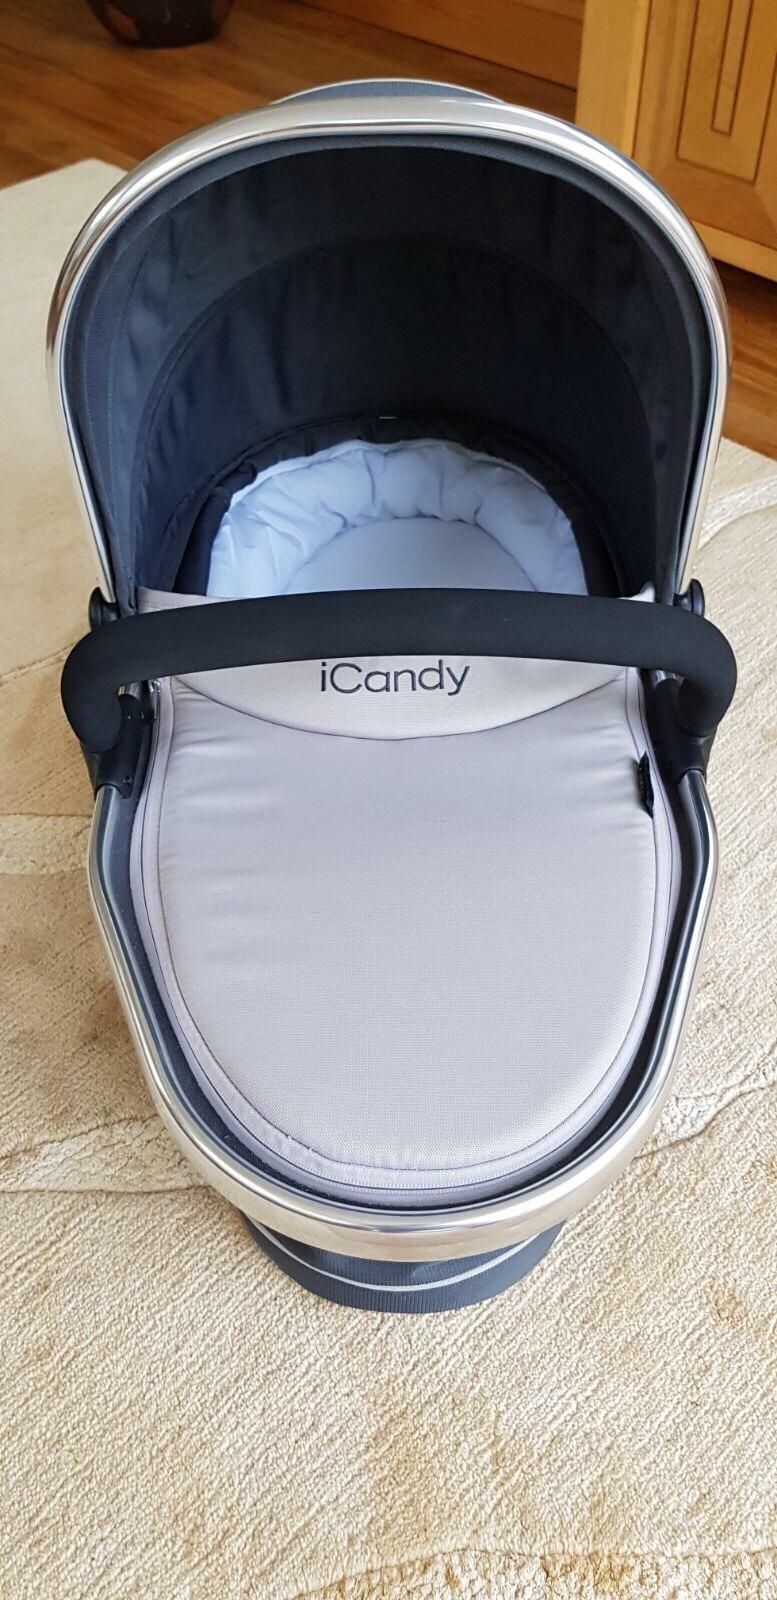 icandy peach blossom carrycot